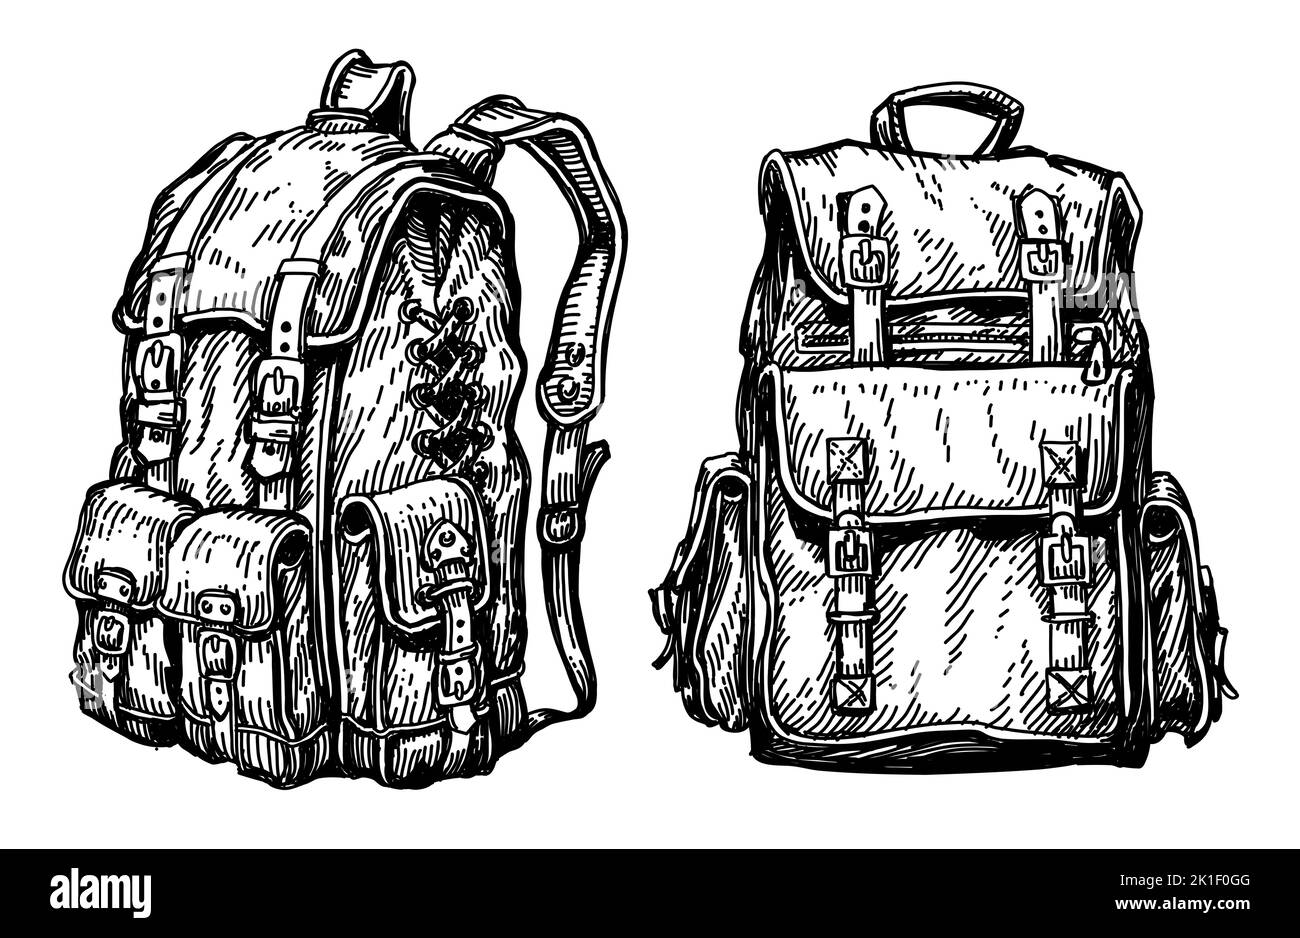 Tourist camping backpack sketch. Hike, hiking concept. Hand drawn illustration isolated on white background Stock Photo